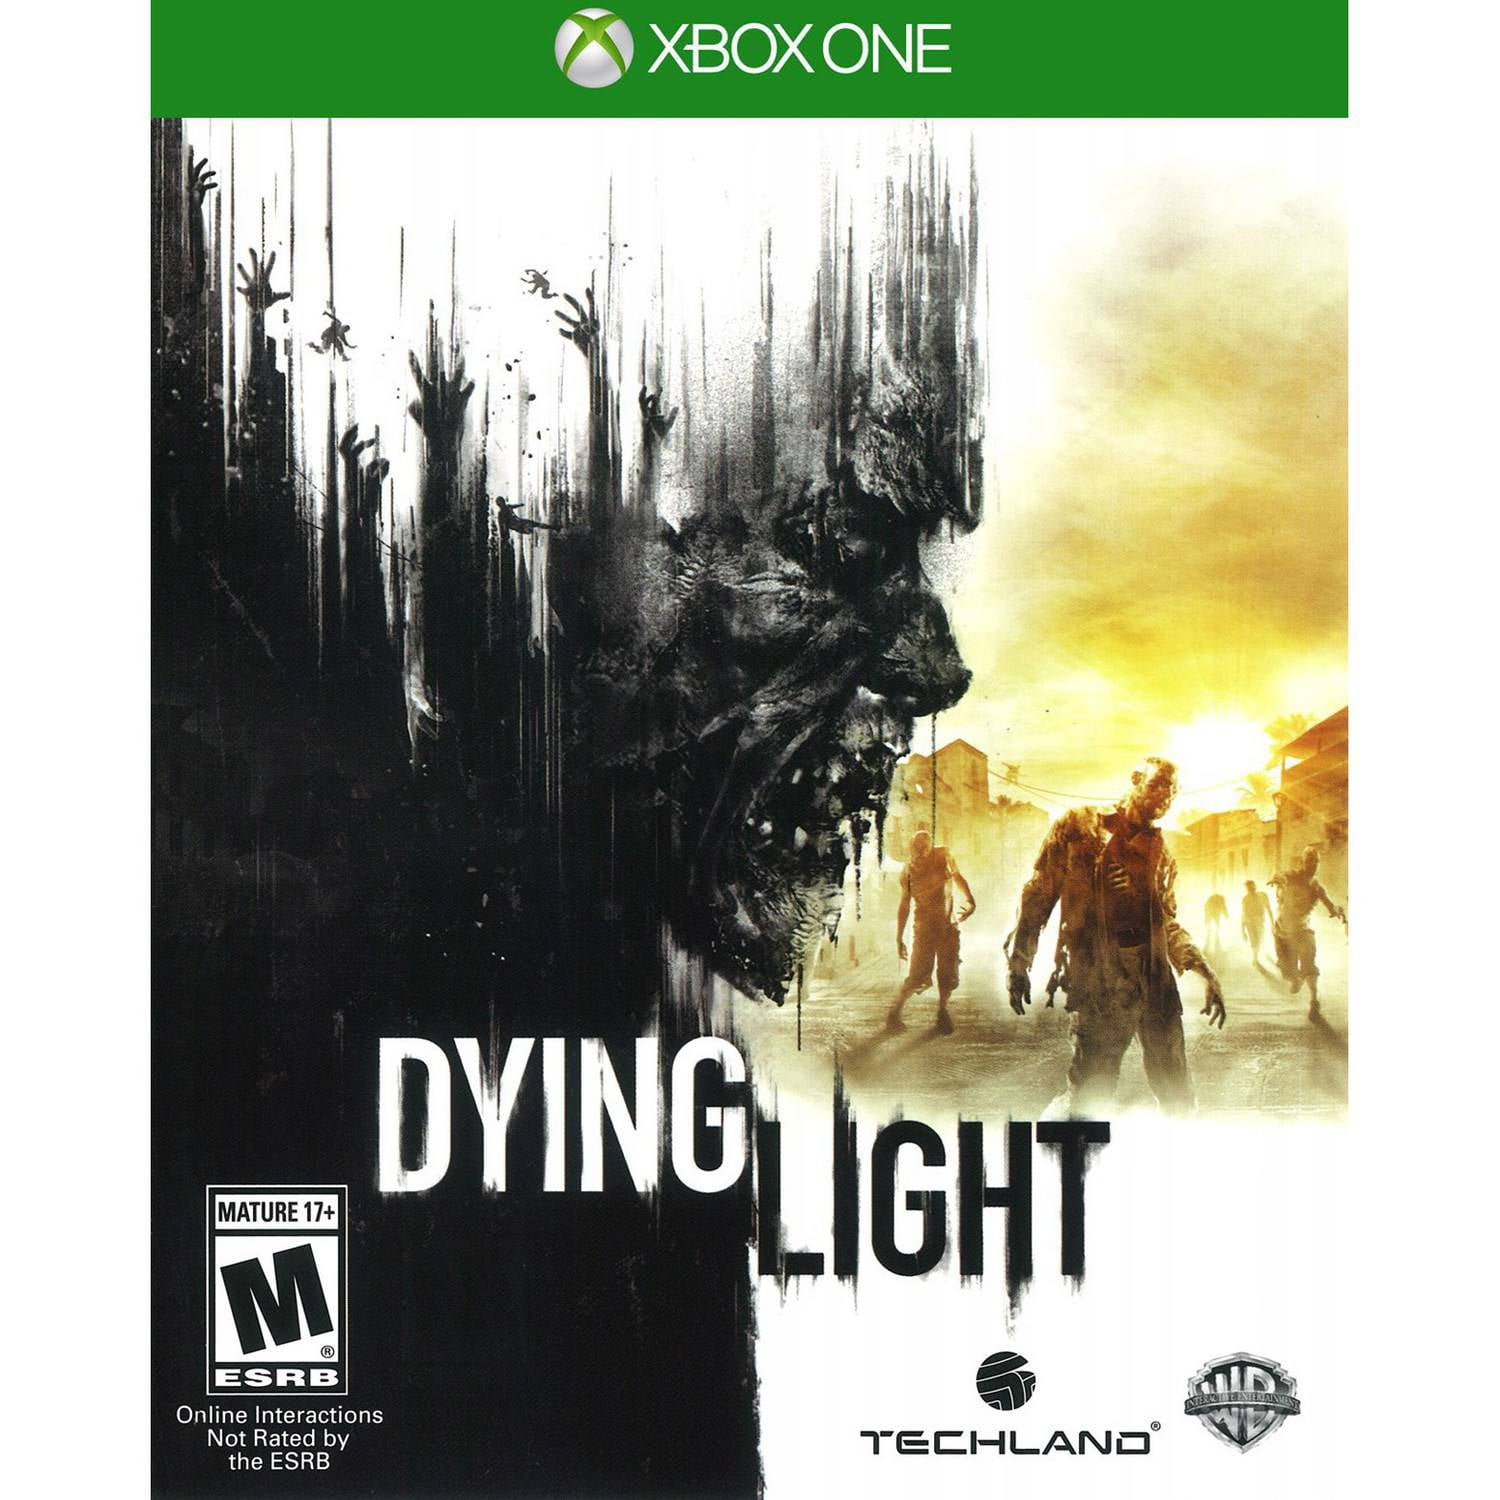 dying light 2 xbox one price